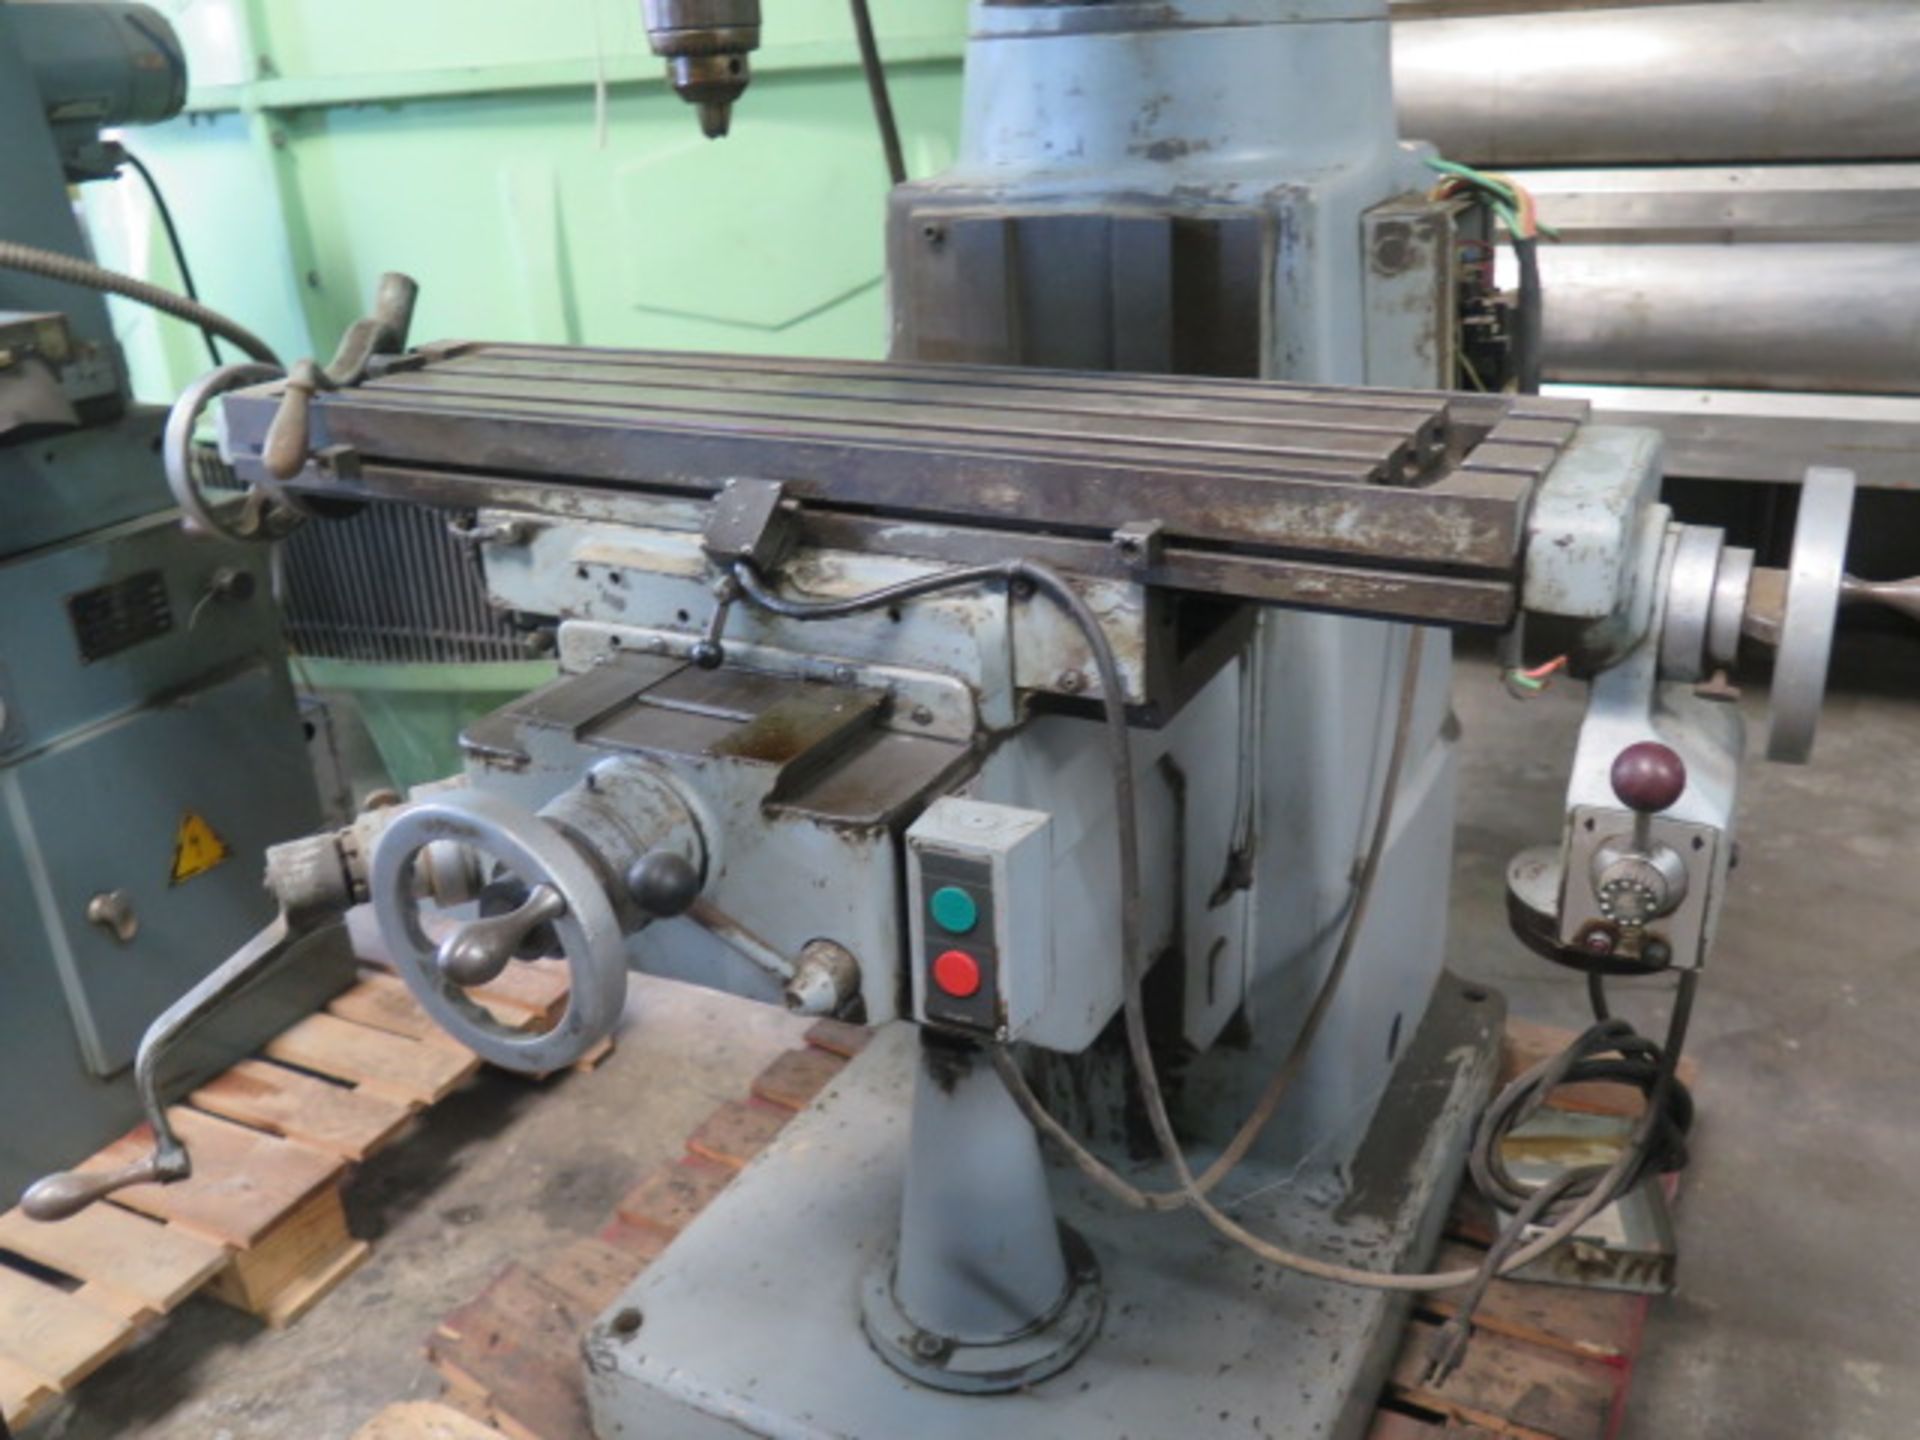 Ex-Cell-O Vertical Mill w/ 100-3800 Dial Change RPM, R8 SpdL, Power Feed, 9” x 36” Table, SOLD AS IS - Image 5 of 7